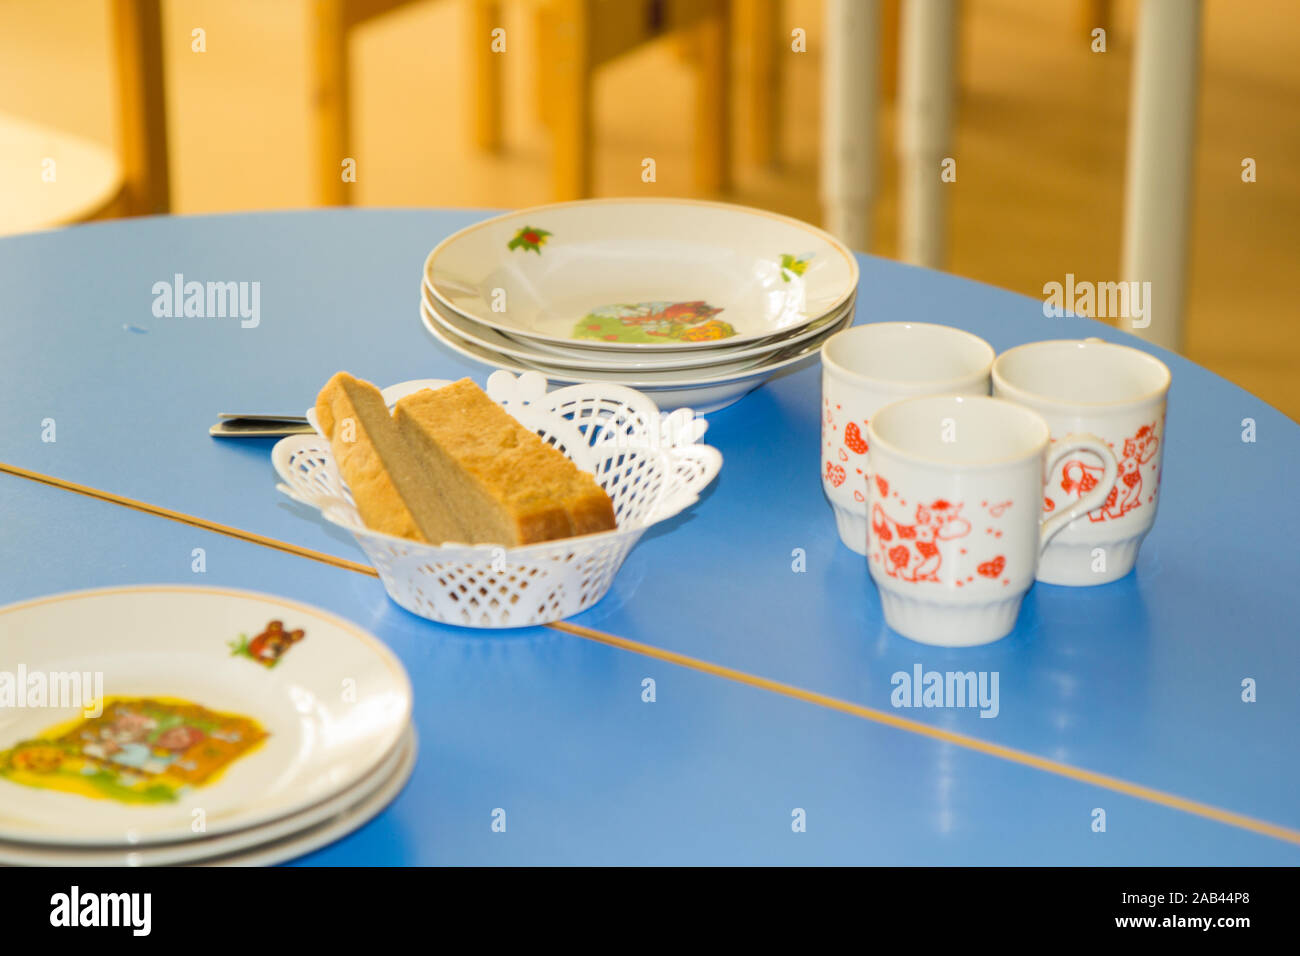 Served dinner table for children with bread, plates with illustrations. Colorful child table. Kinder garden at lunch time. Stock Photo